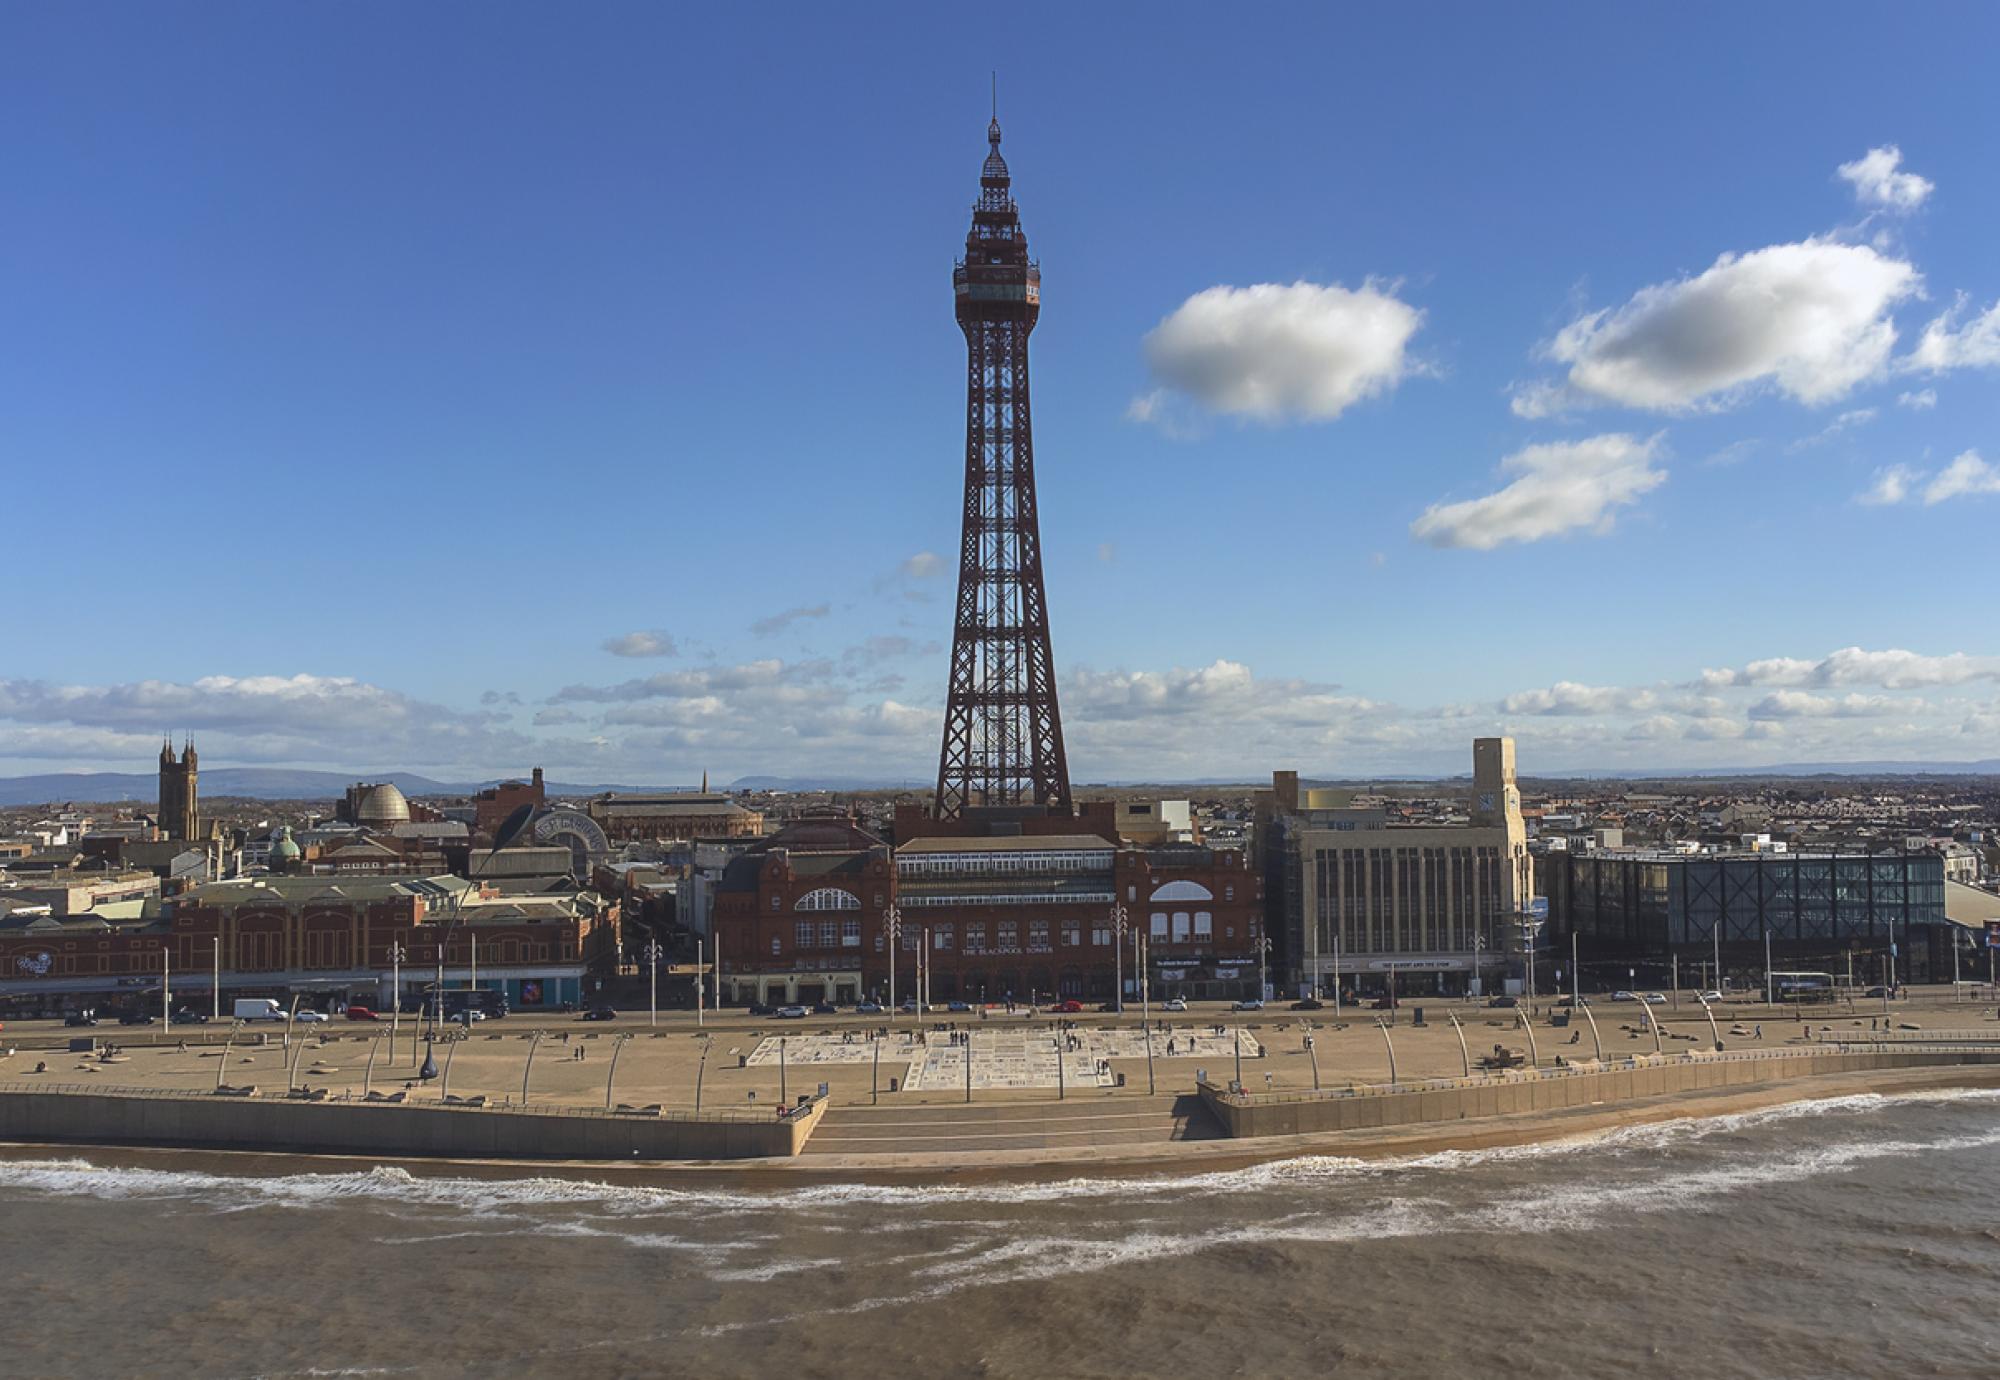 An aerial view of Blackpool Tower in Lancashire